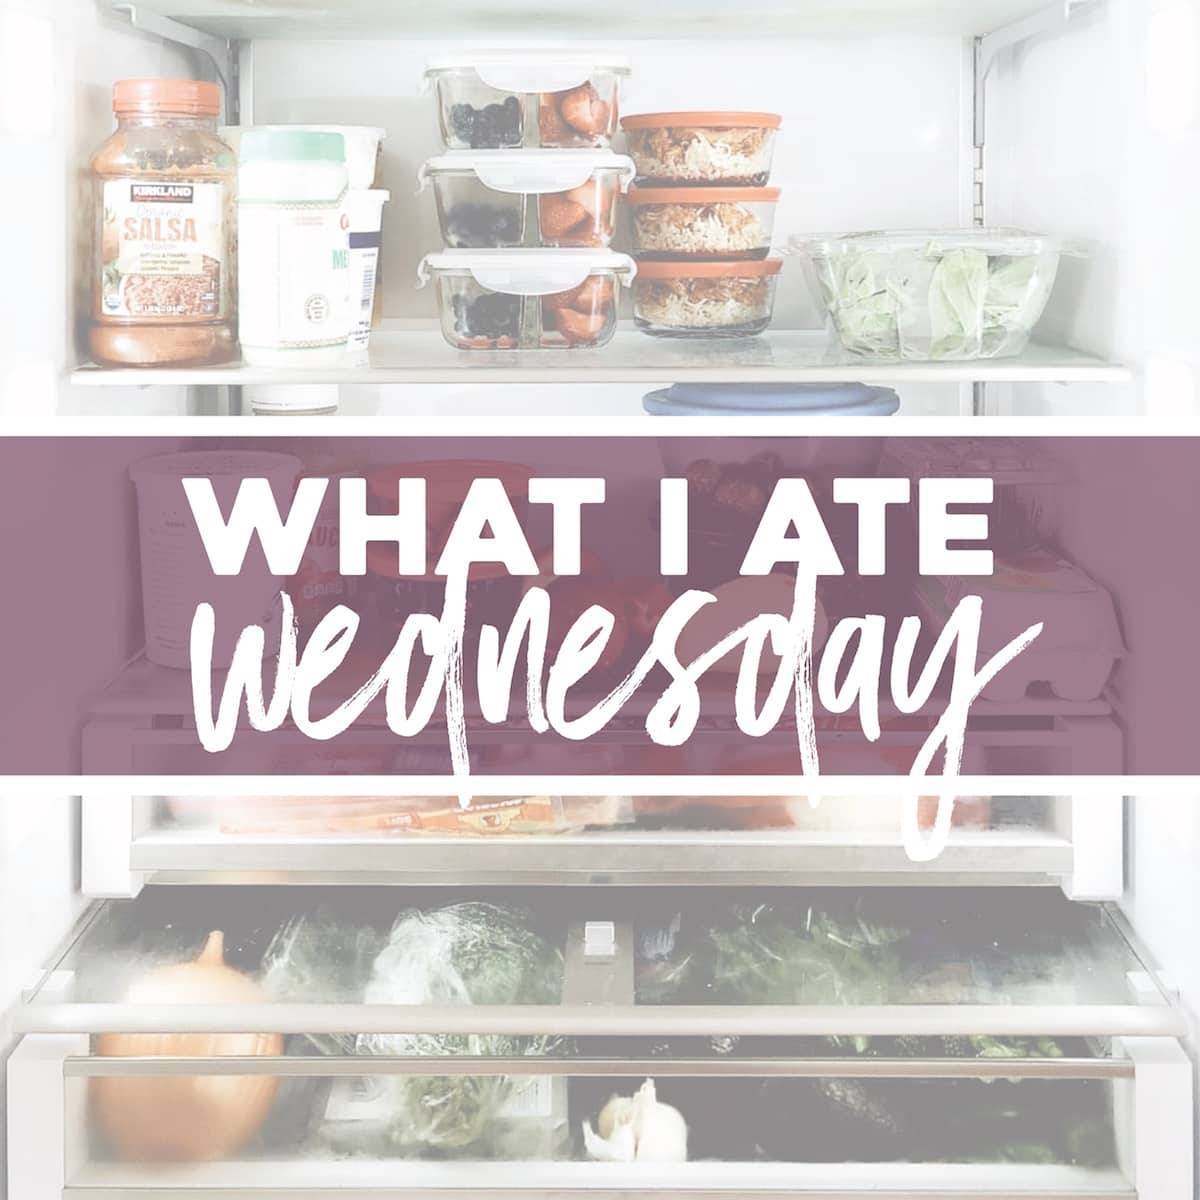 A filled refrigerator is used to show 'What I Ate Wednesday'.